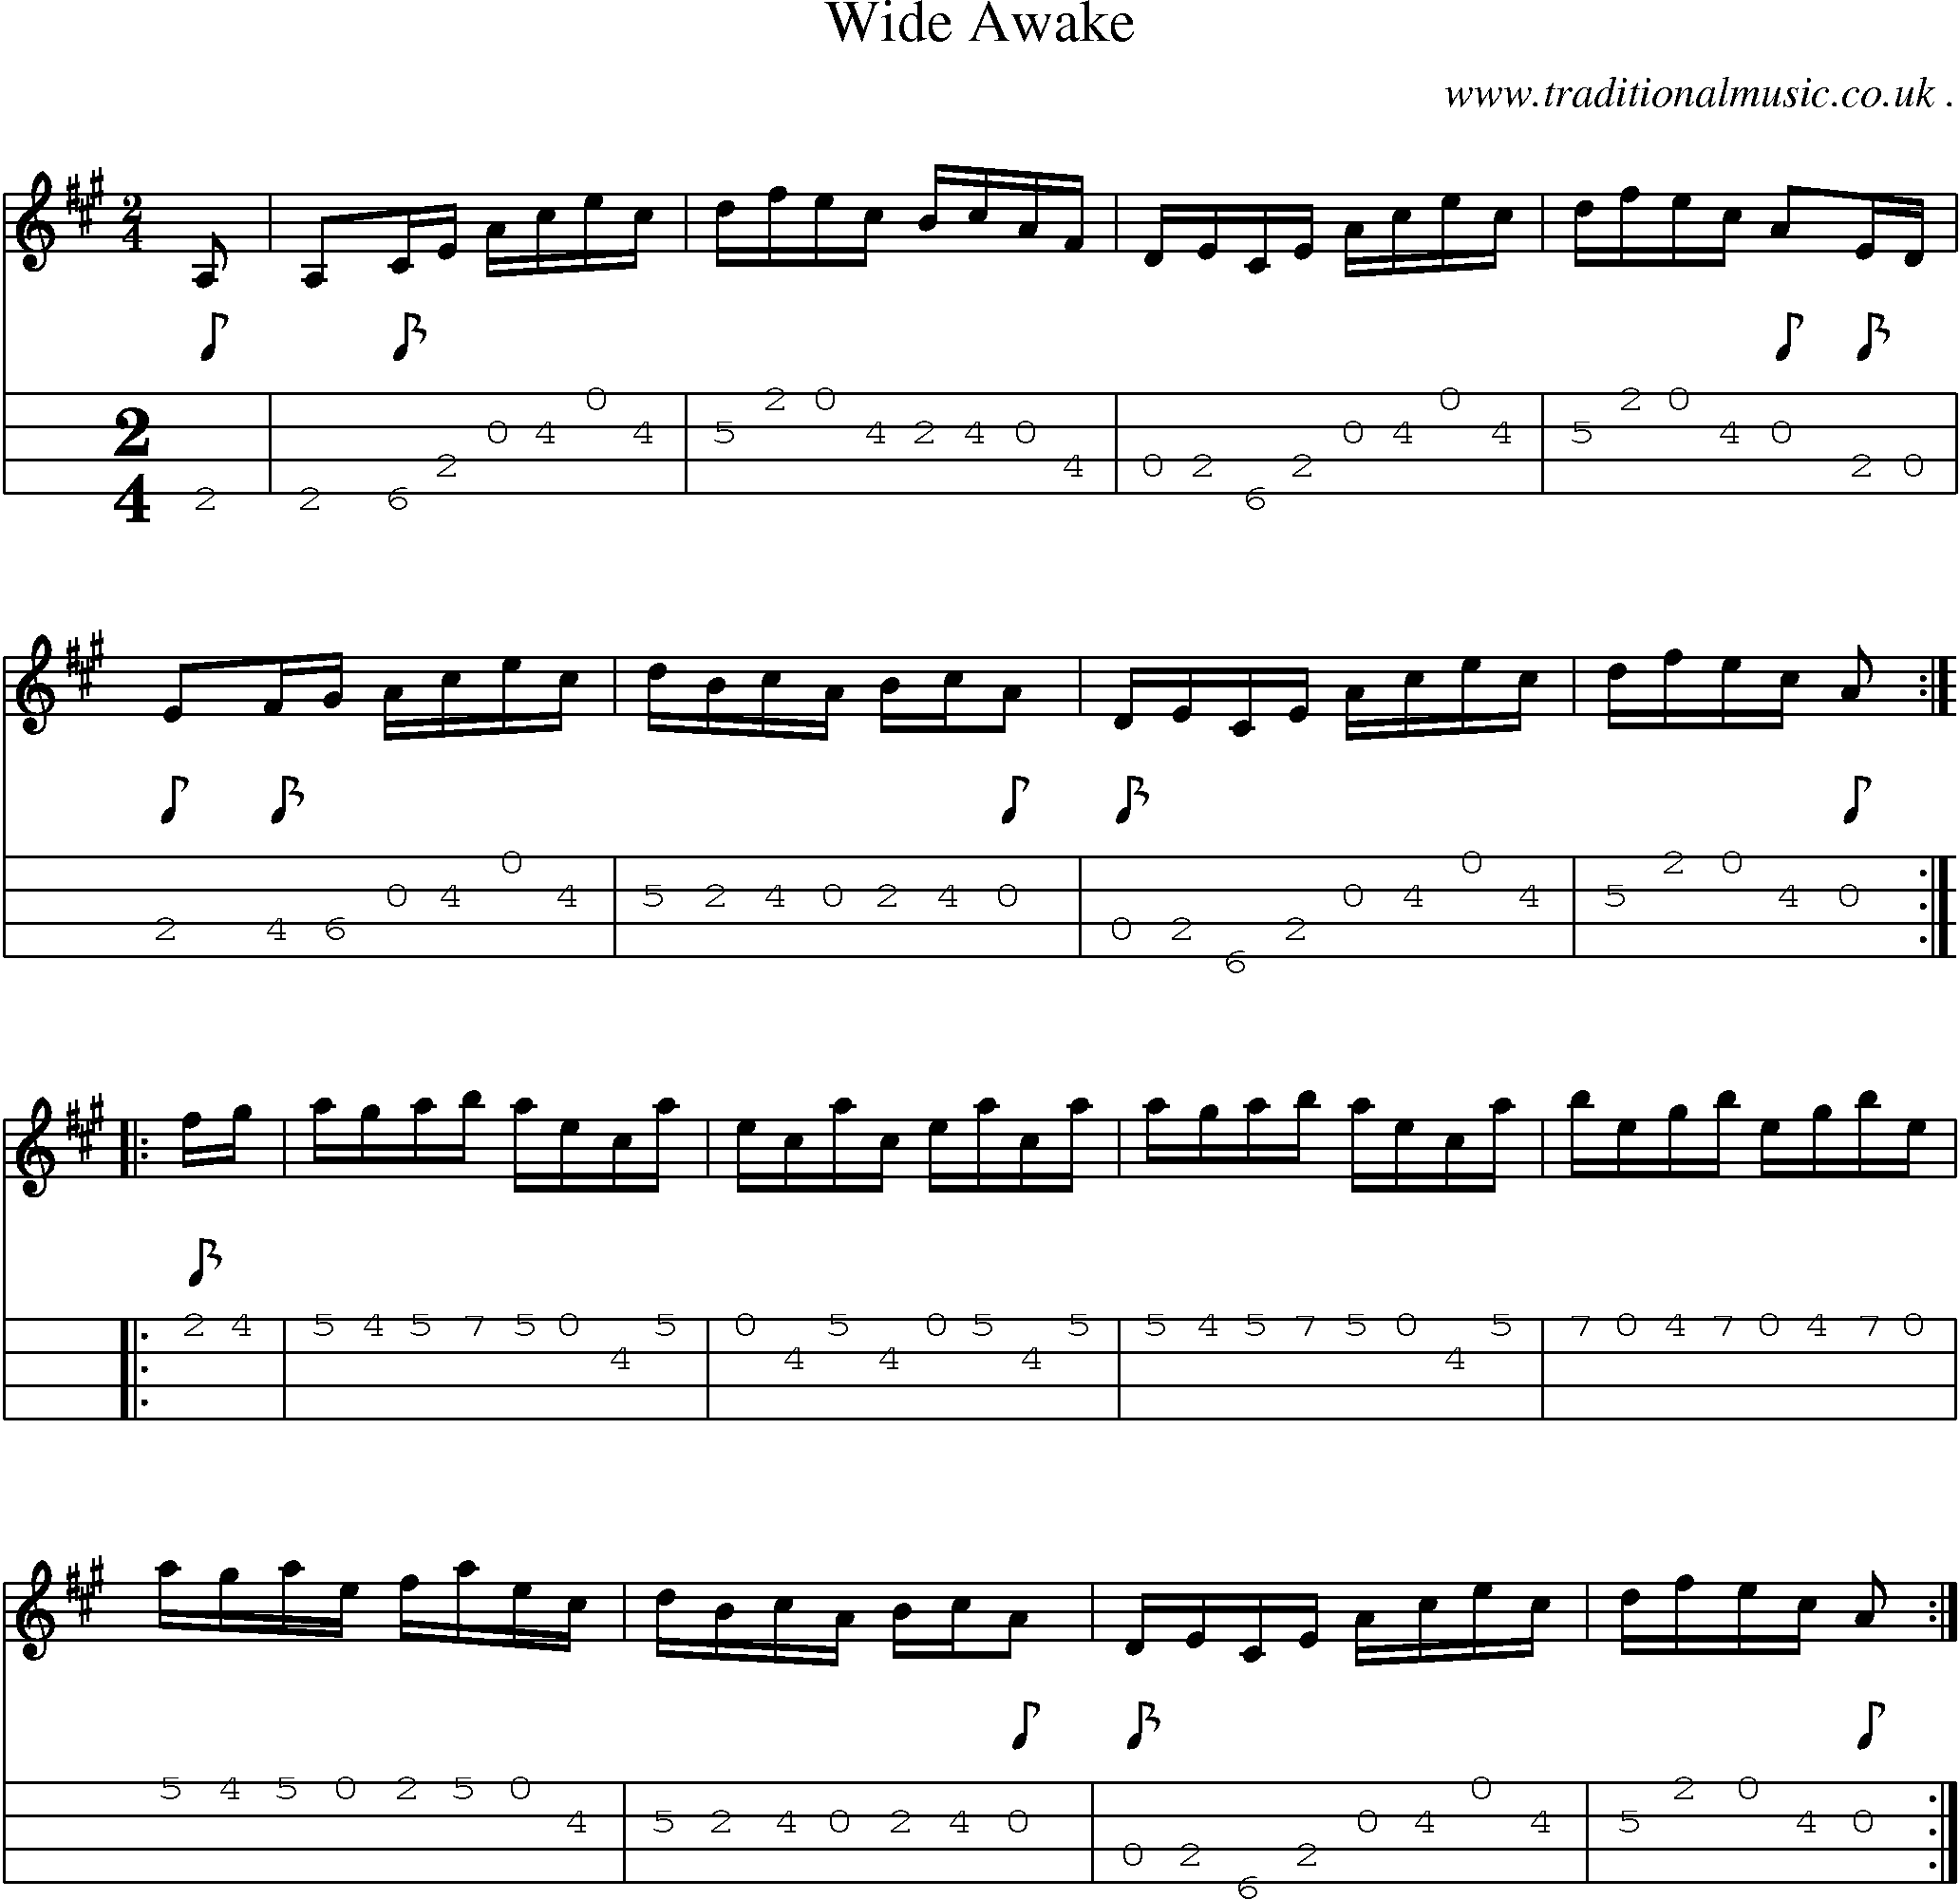 Sheet-Music and Mandolin Tabs for Wide Awake